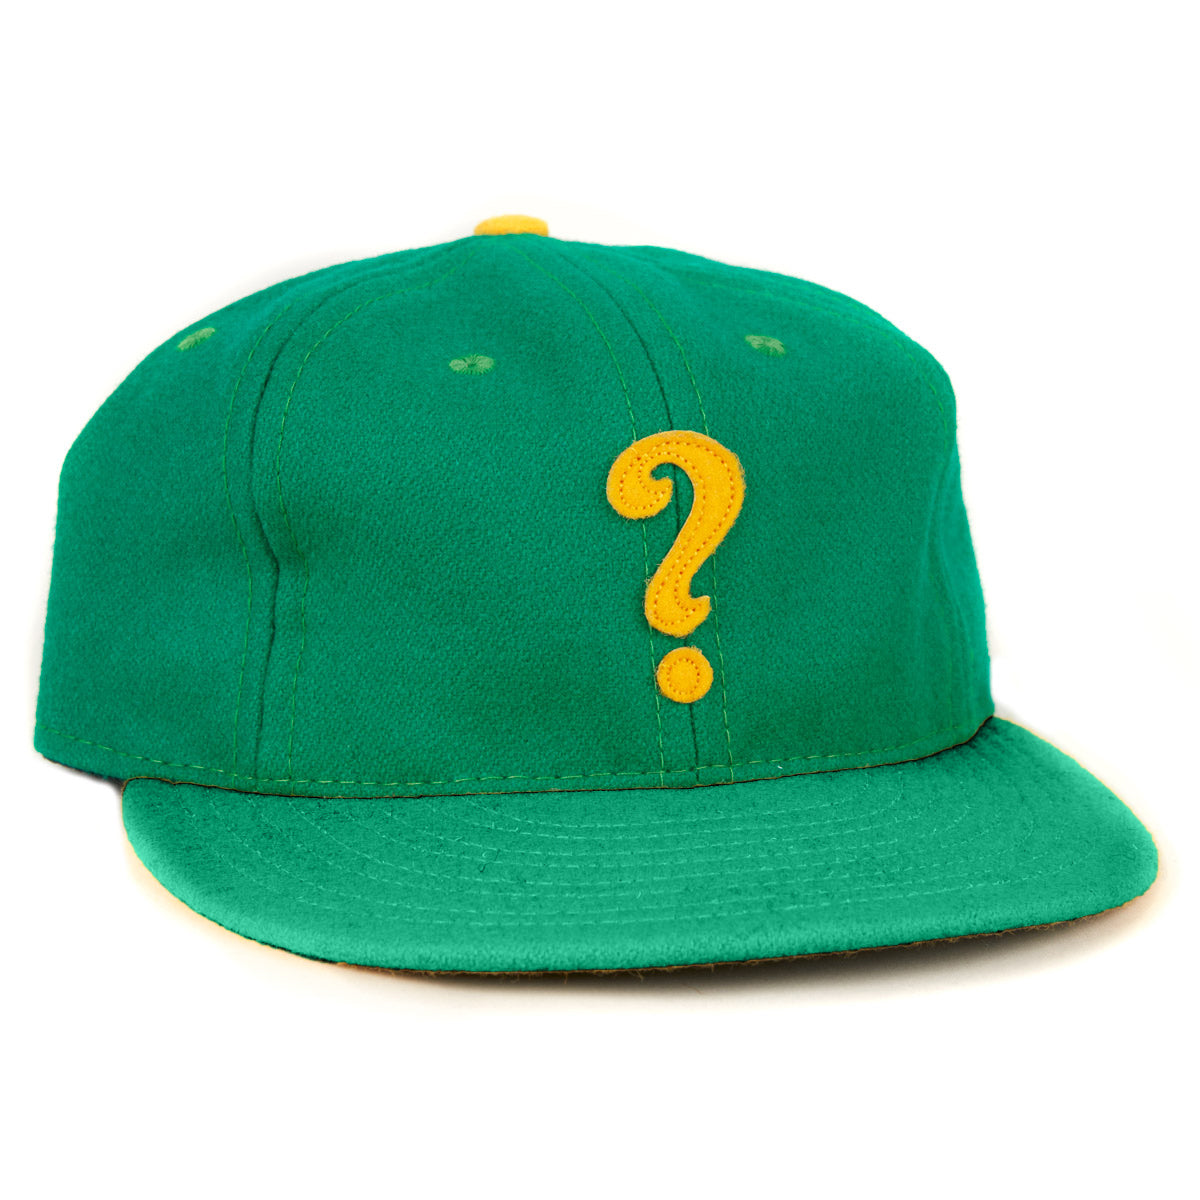 Clearing Question Marks 1941 Vintage Ballcap